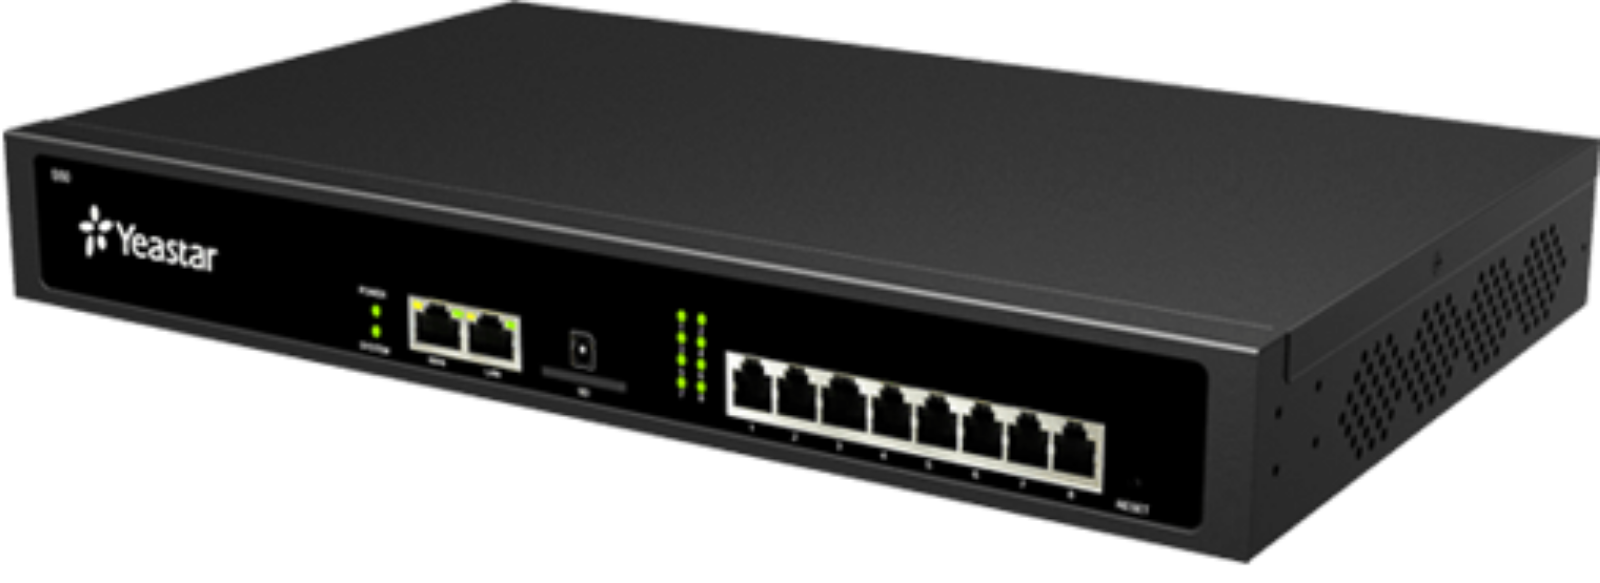 compact and full-featured IP-PBX that comes in a 19’’ 1U,1U rack-mountable chassis. The advanced module-based S20,S50,S100,S300 is capable of supporting ISDN BRI, PSTN, and GSM connectivity, providing VoIP communications for up to 500 users.